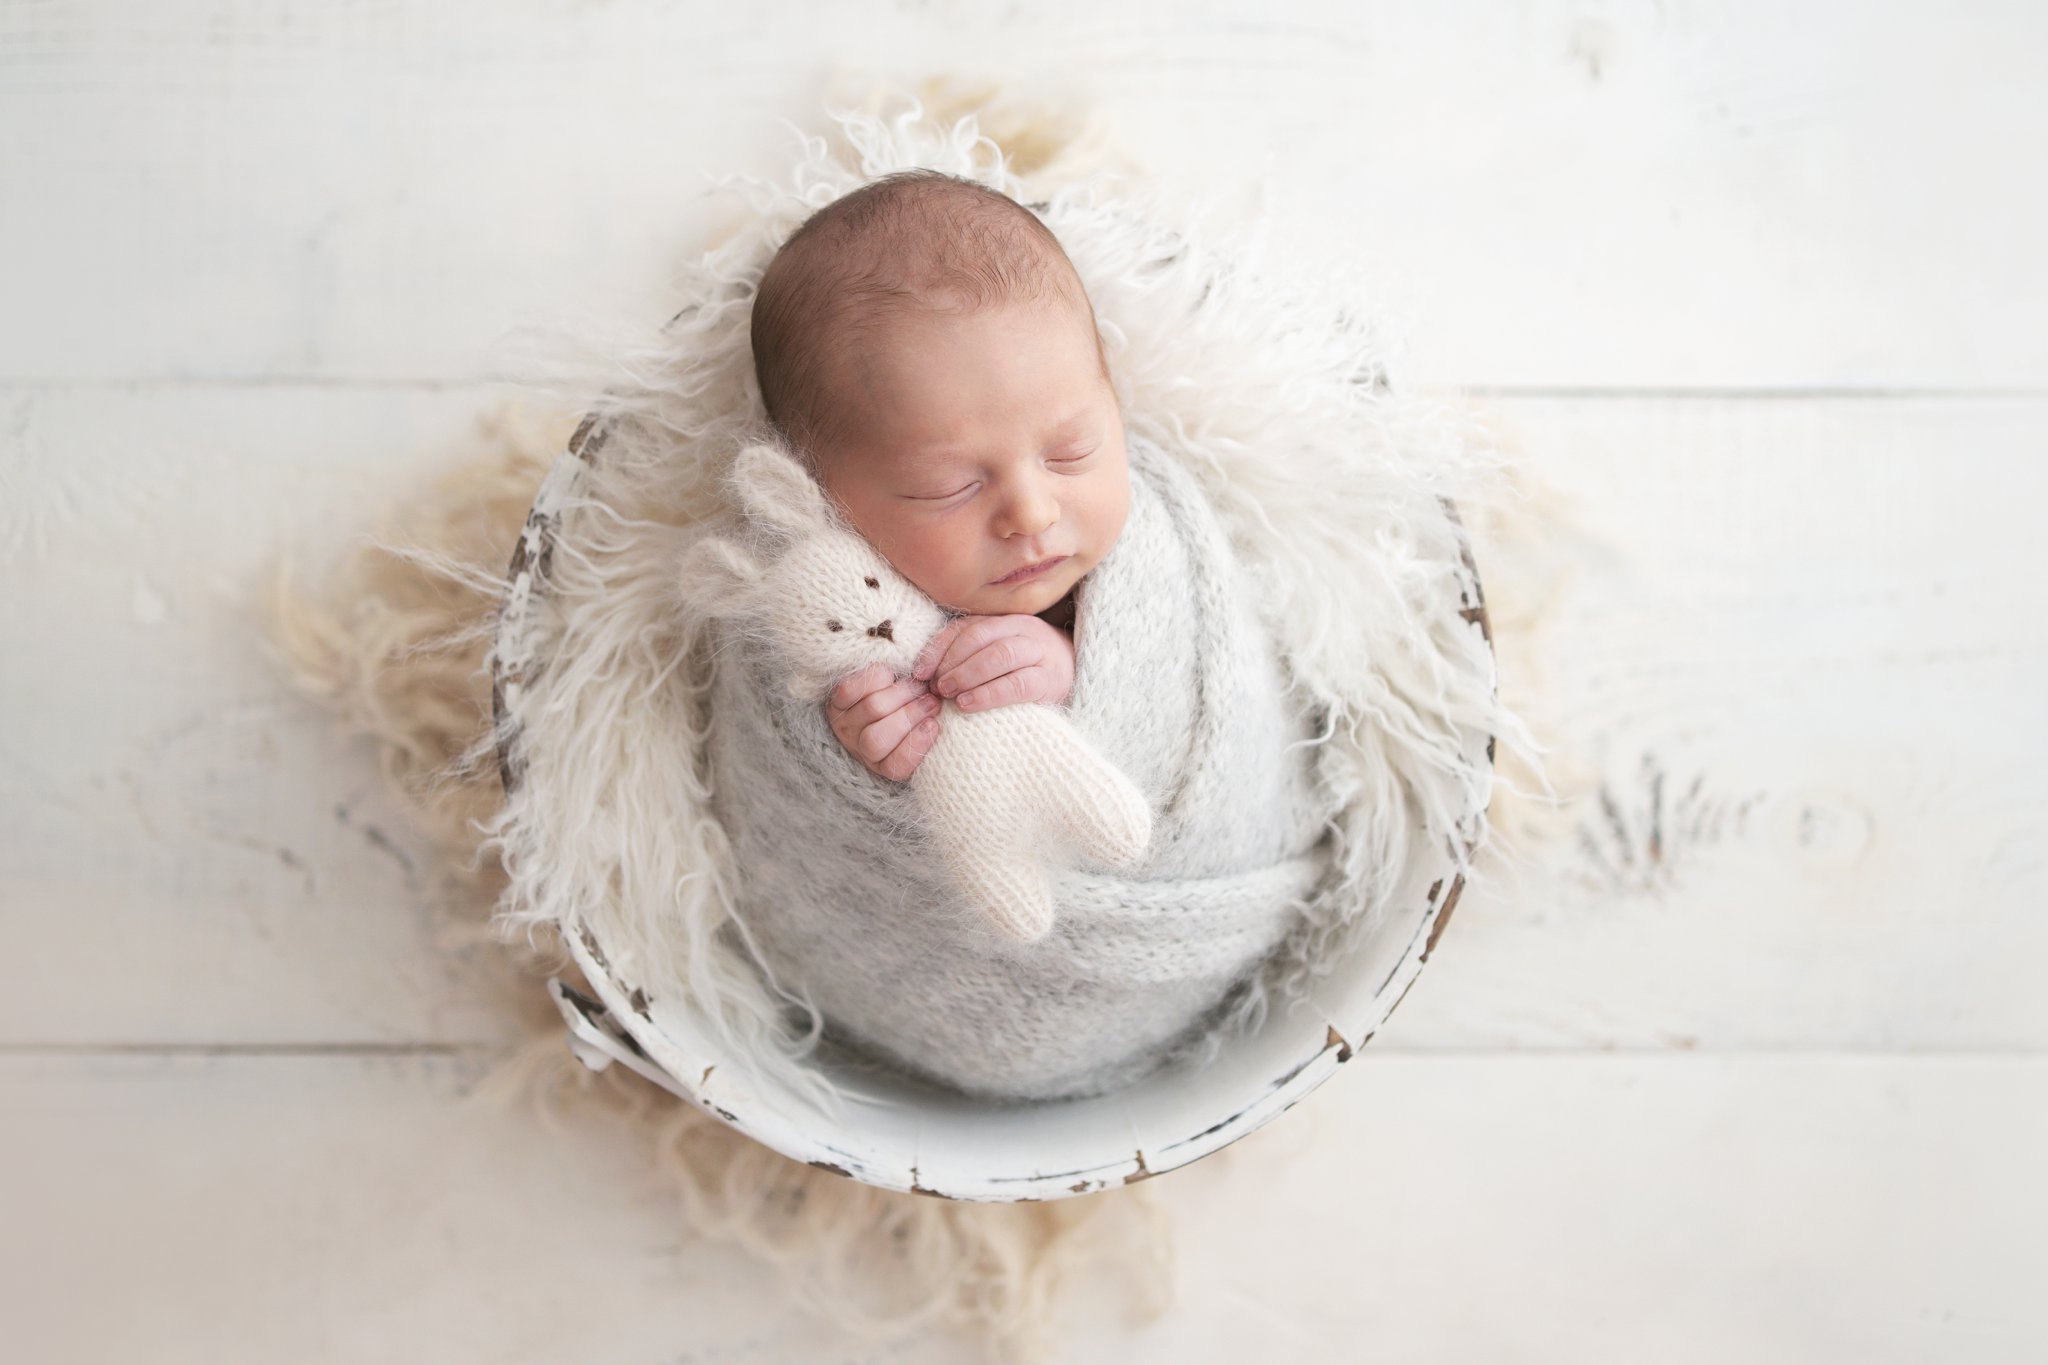 10 day old newborn posing in a wooden antique bucket holding a white stuffed bunny in West Palm Beach Photography studio